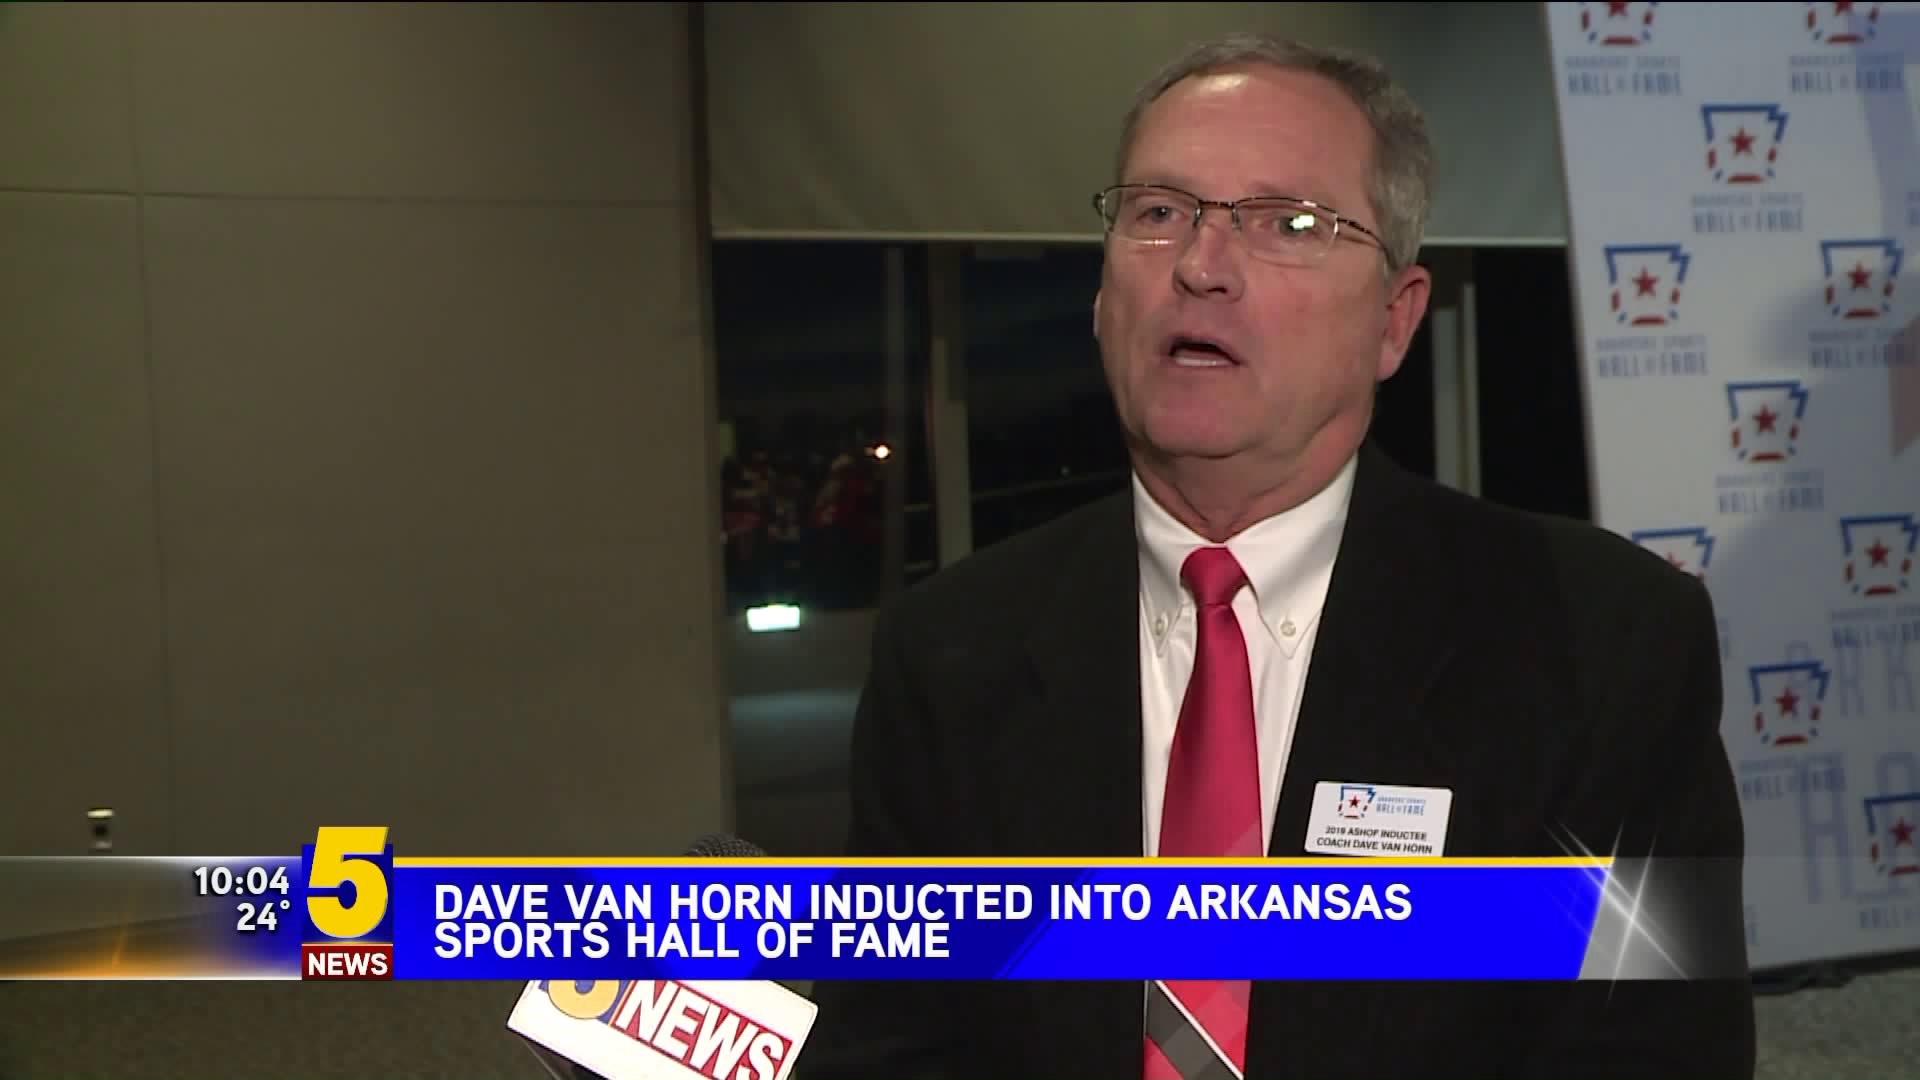 Dave Van Horn Inducted Into Arkansas Sports Hall of Fame